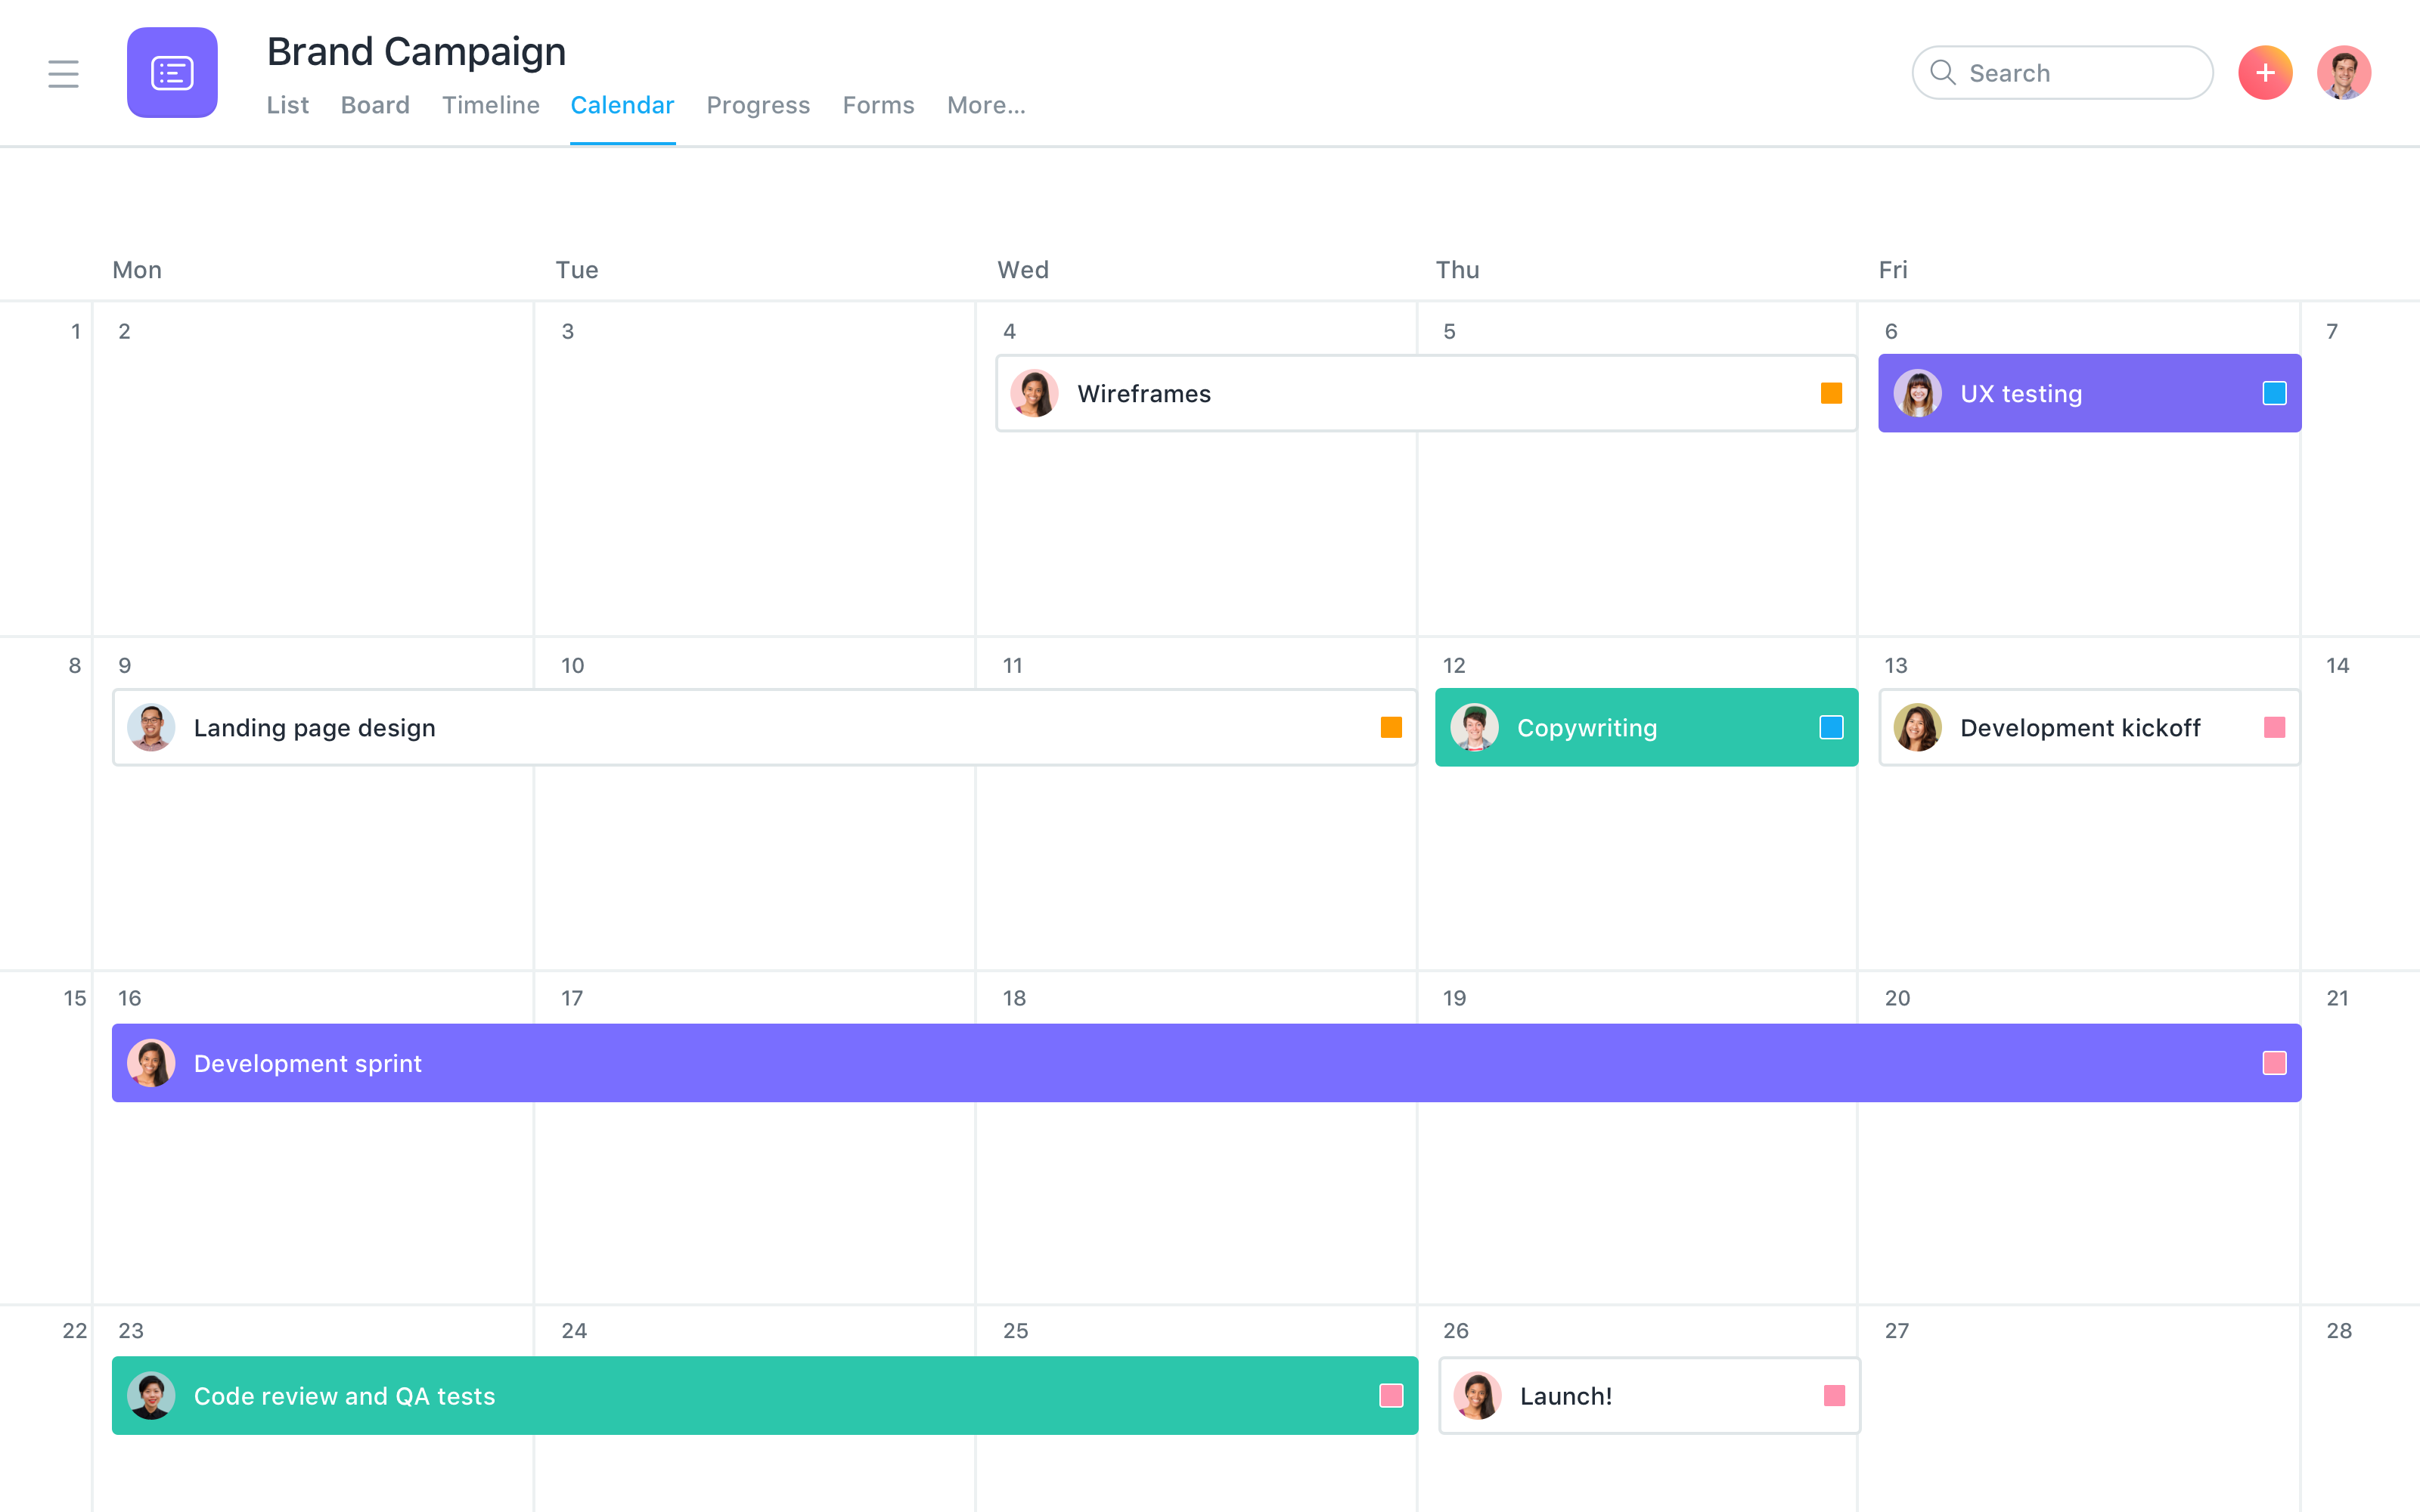 Post status updates, share team-wide announcements, and collaborate on tasks — all in Asana.